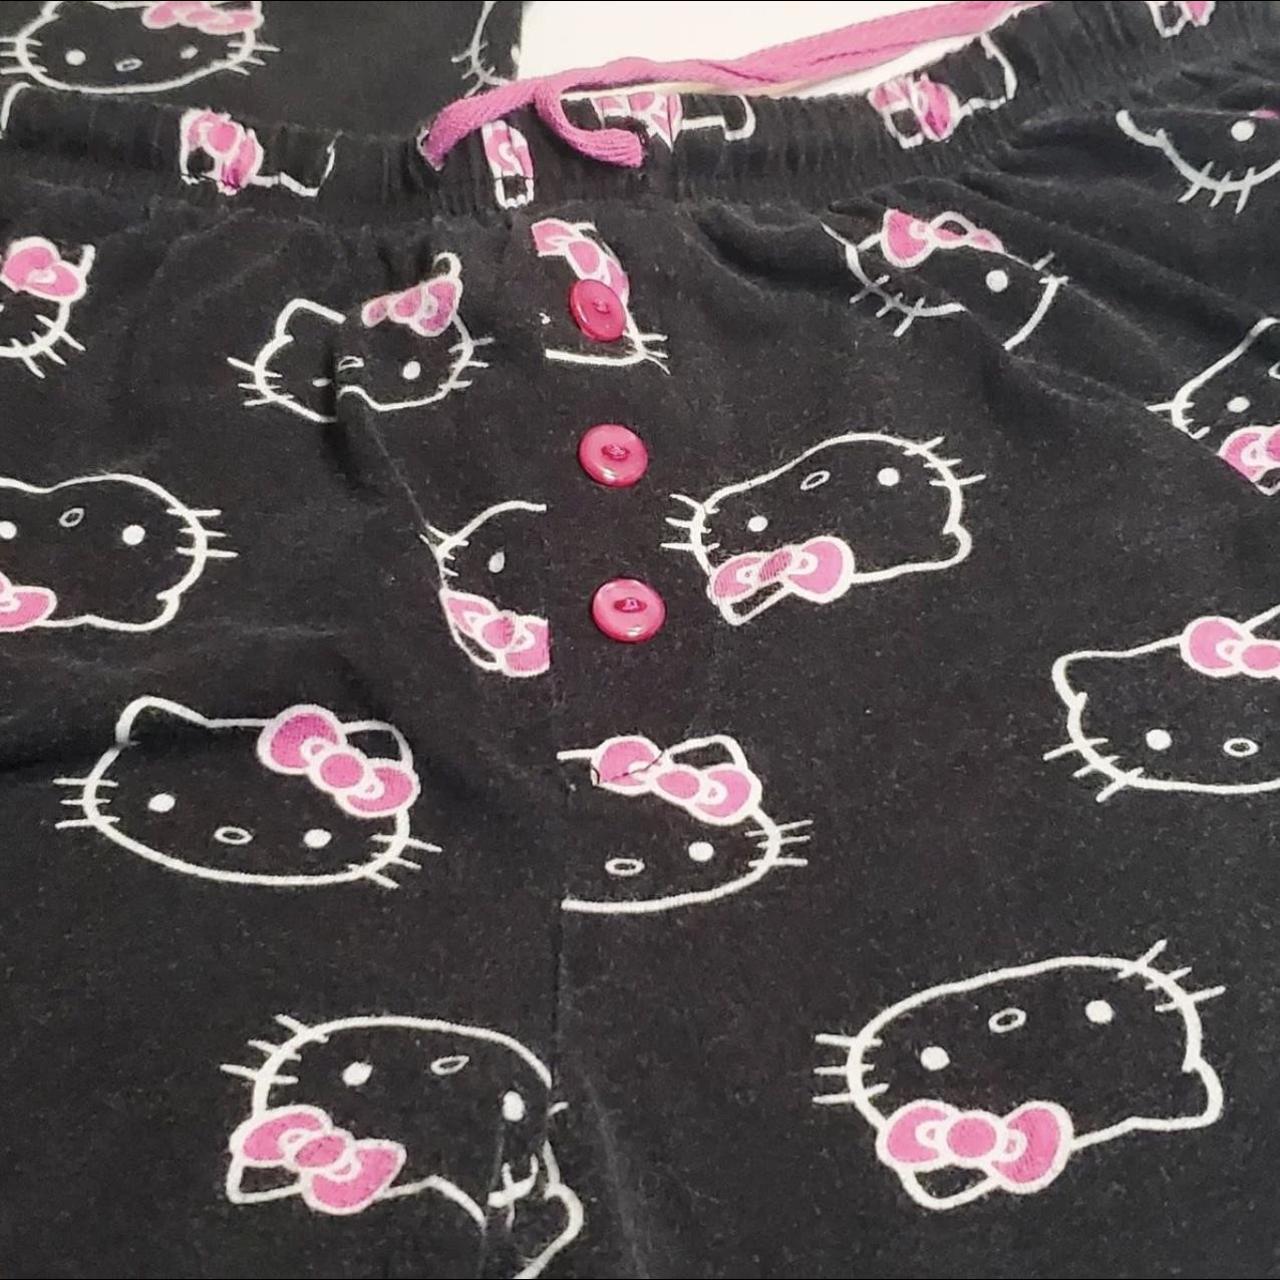 ⚠️ISO⚠️ IN SEARCH FOR THESE BLACK HELLO KITTY PJ... - Depop